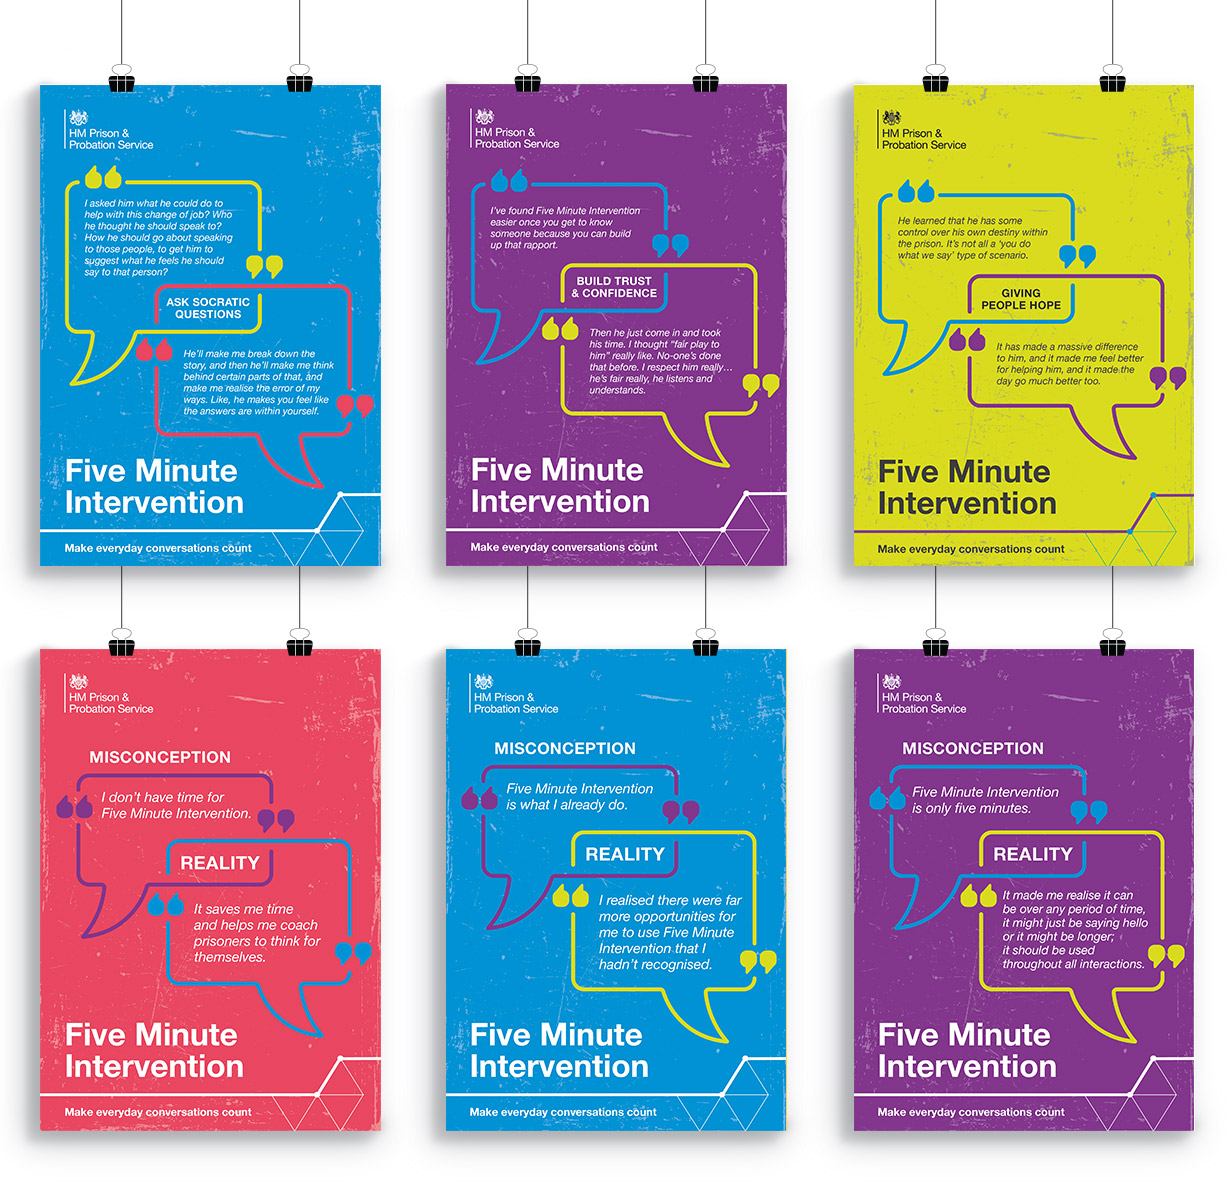 HMPPS - Five Minute Intervention posters